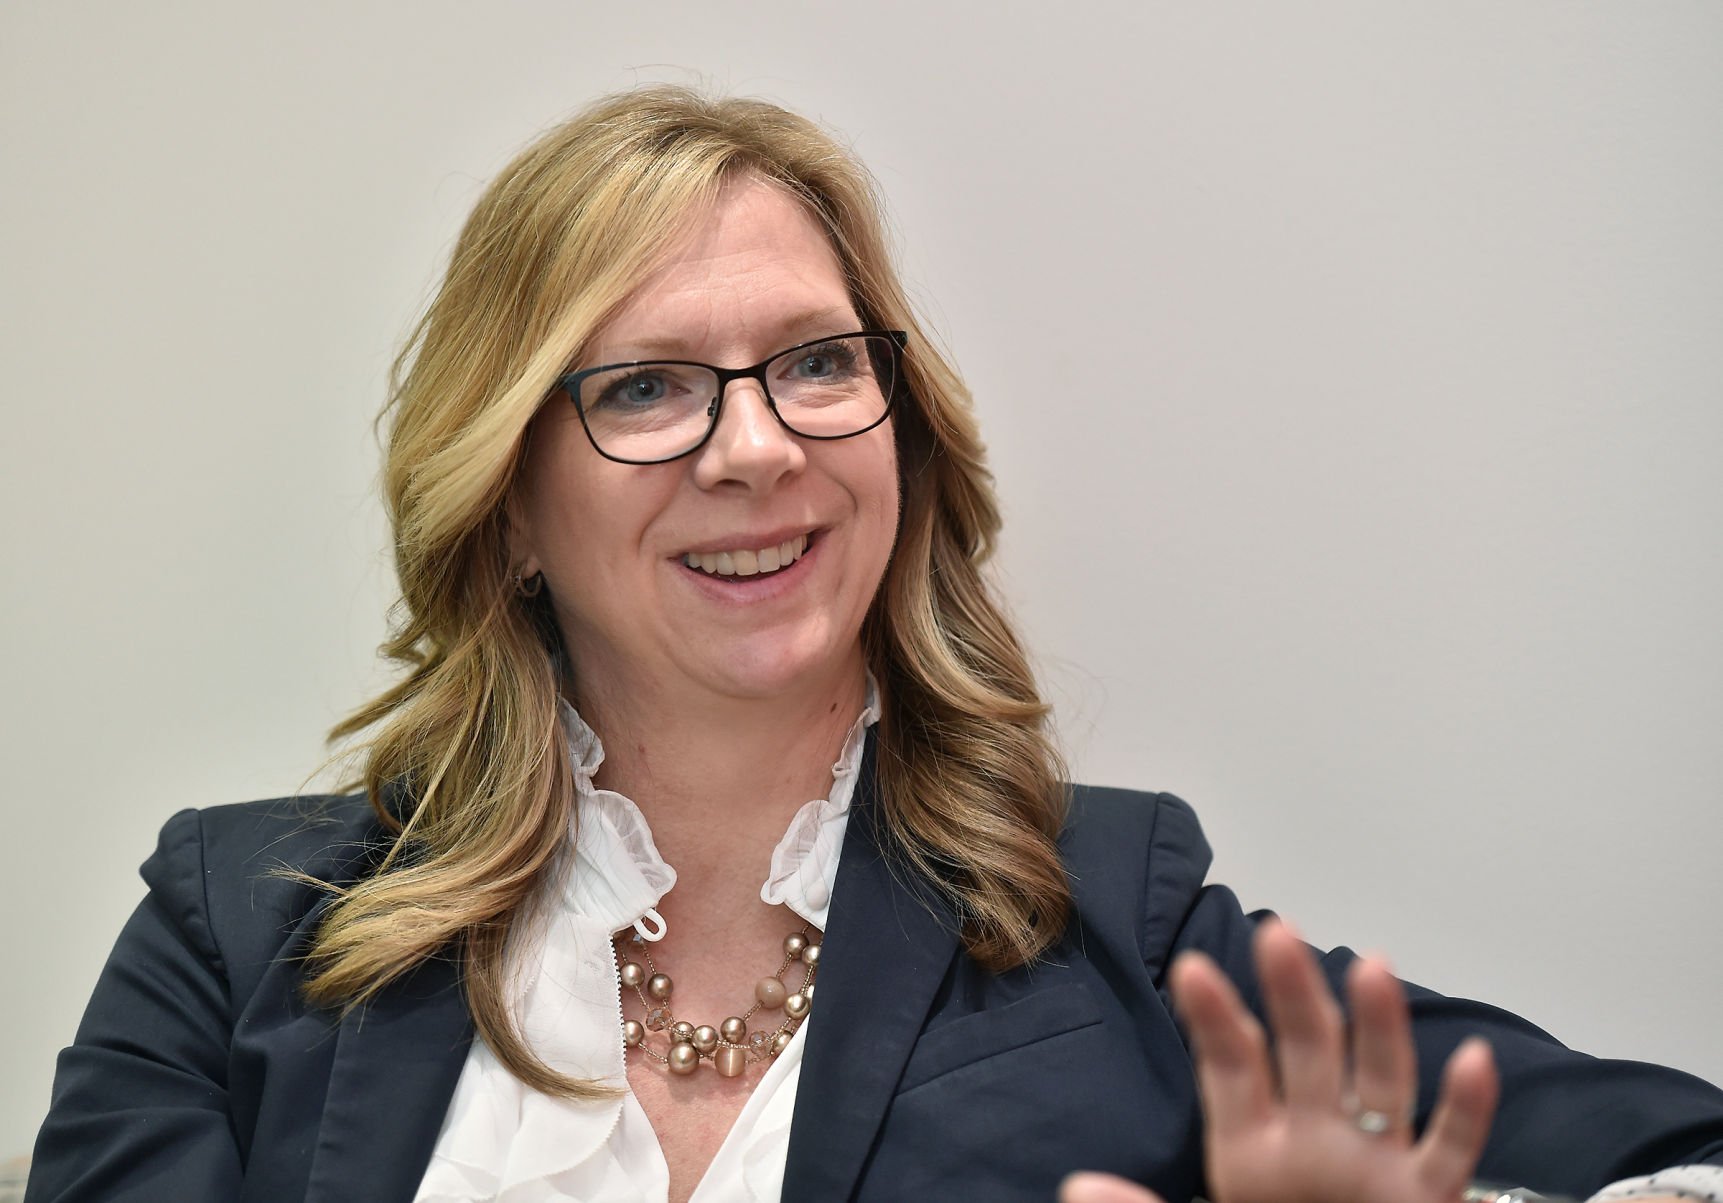 Heather Adams, Republican district attorney candidate, brings experience on both sides of the court Local News lancasteronline image pic